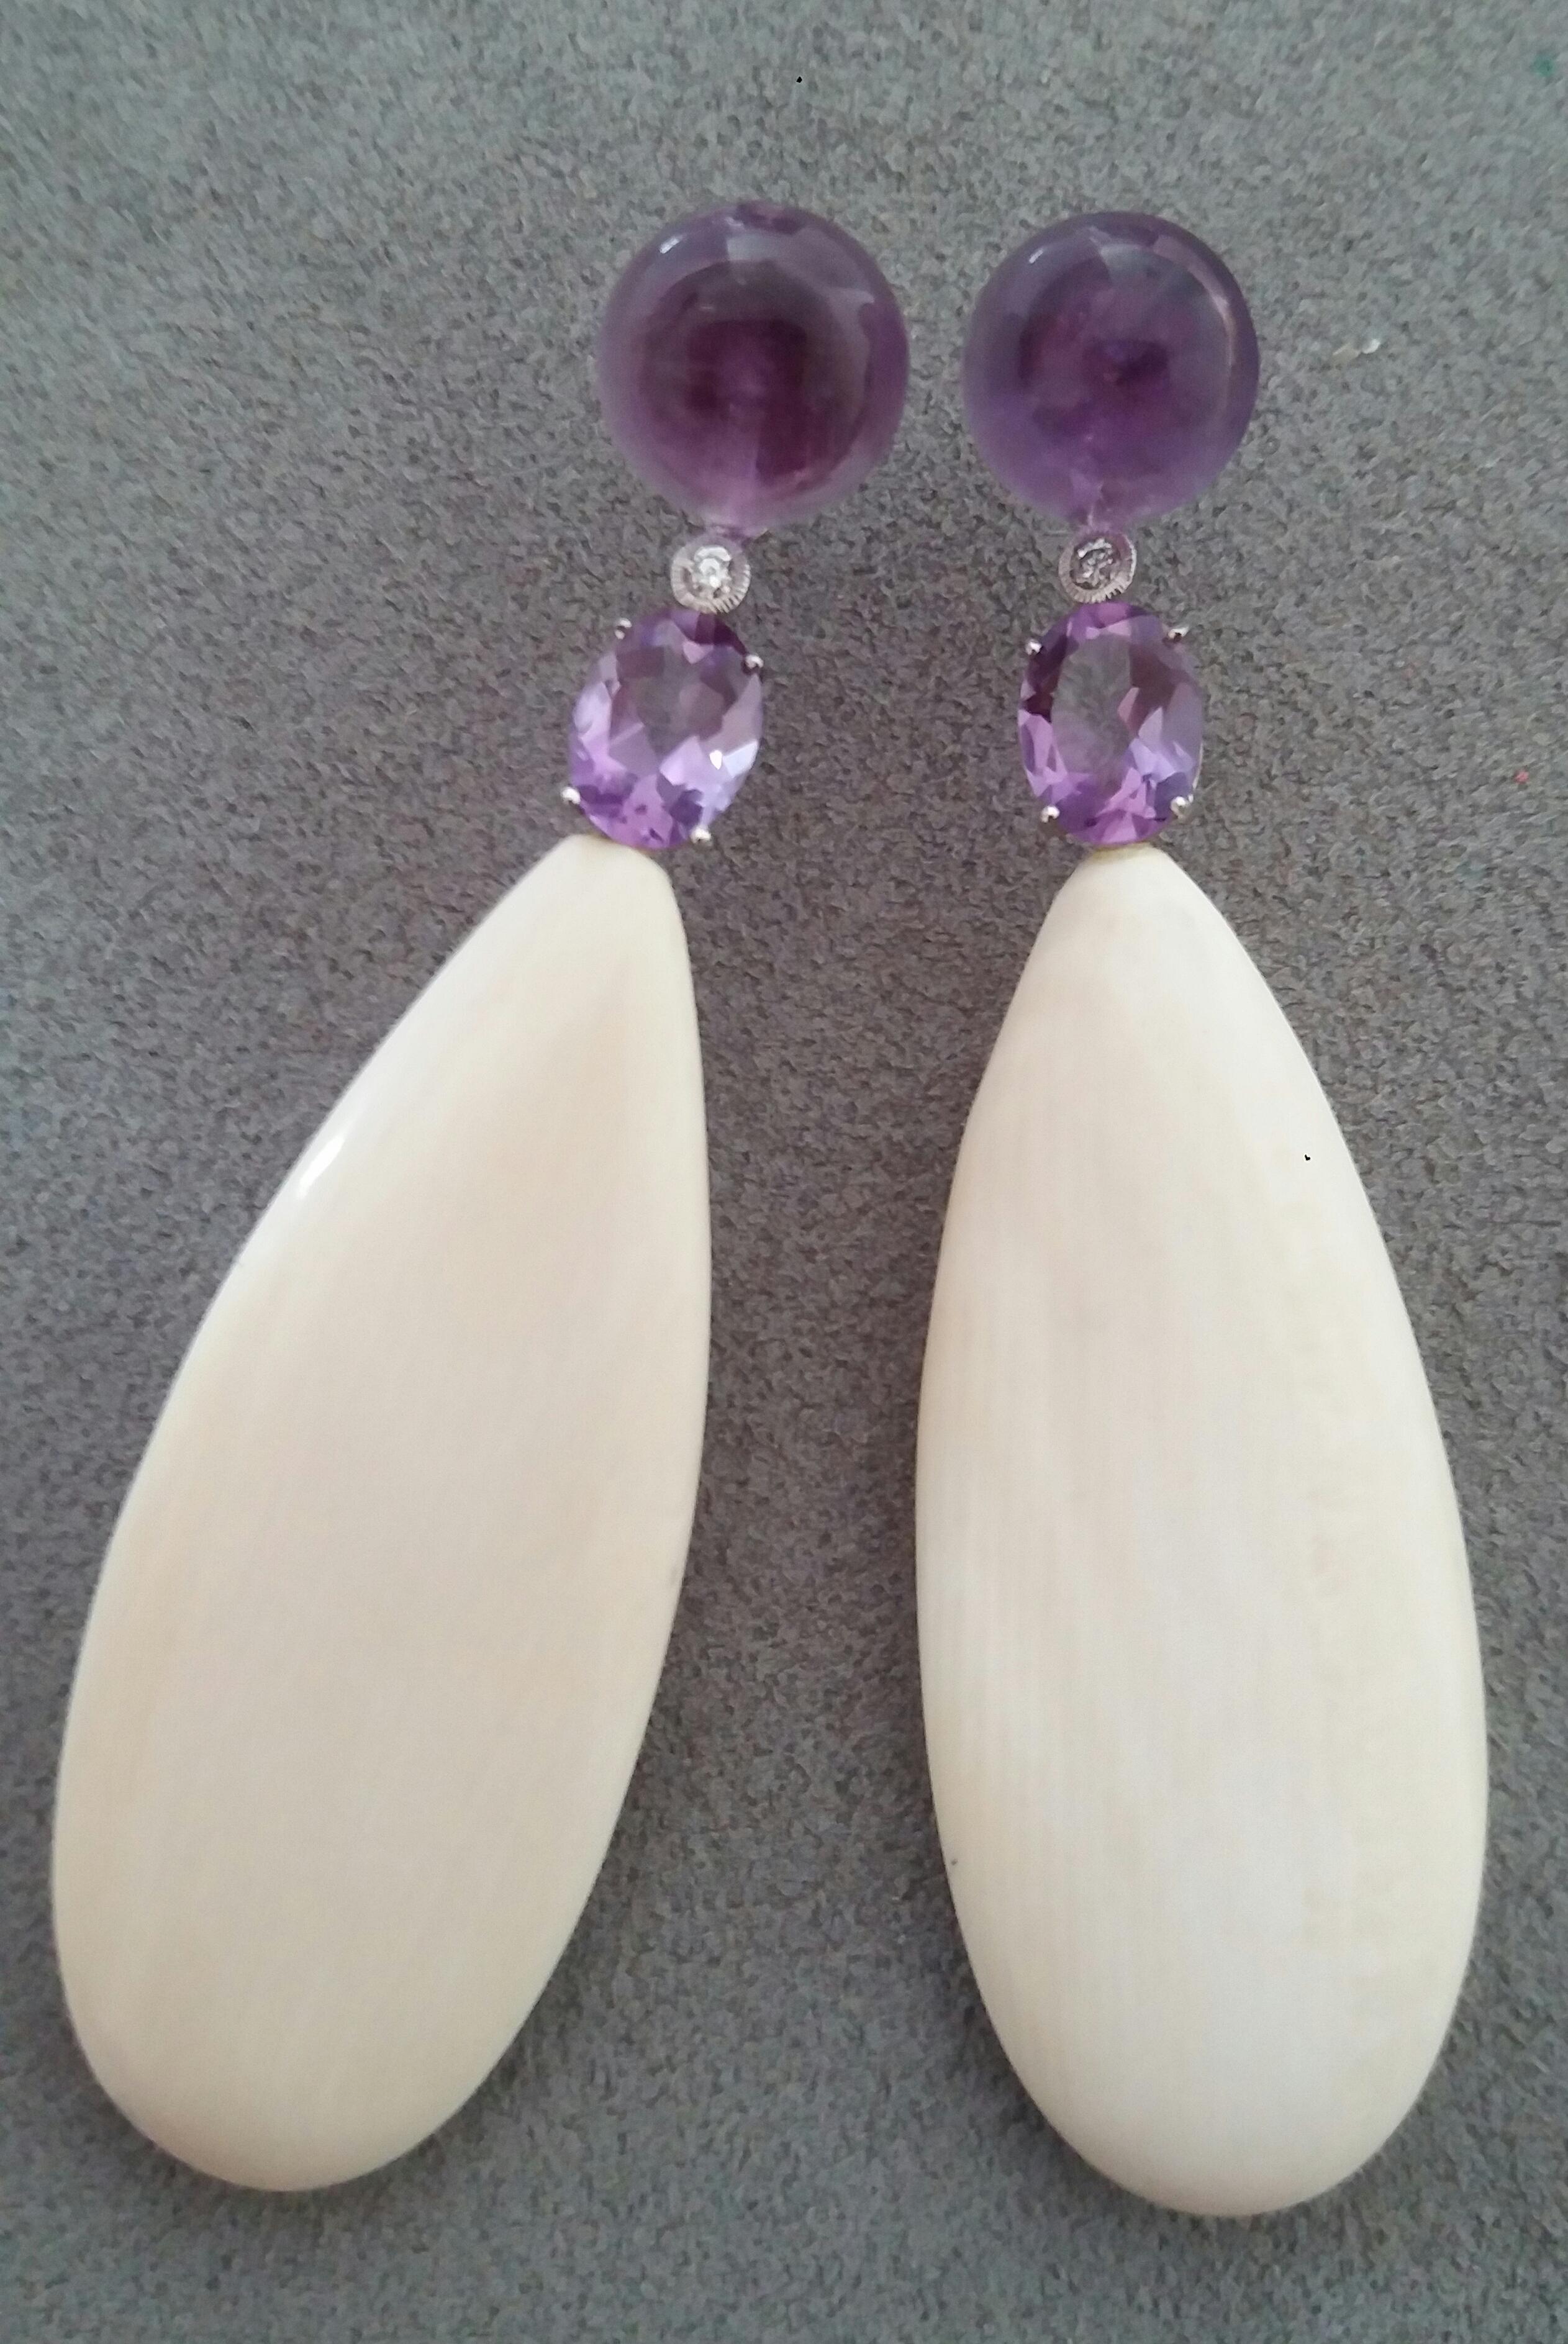 Tops are 2 round  Amethyst buttons,then 2 full cut round diamonds and 2 oval faceted Amethysts set with White Gold are holding 2 big flat Fossil Mammouth plain drops.

In 1978 our workshop started in Italy to make simple-chic Art Deco style